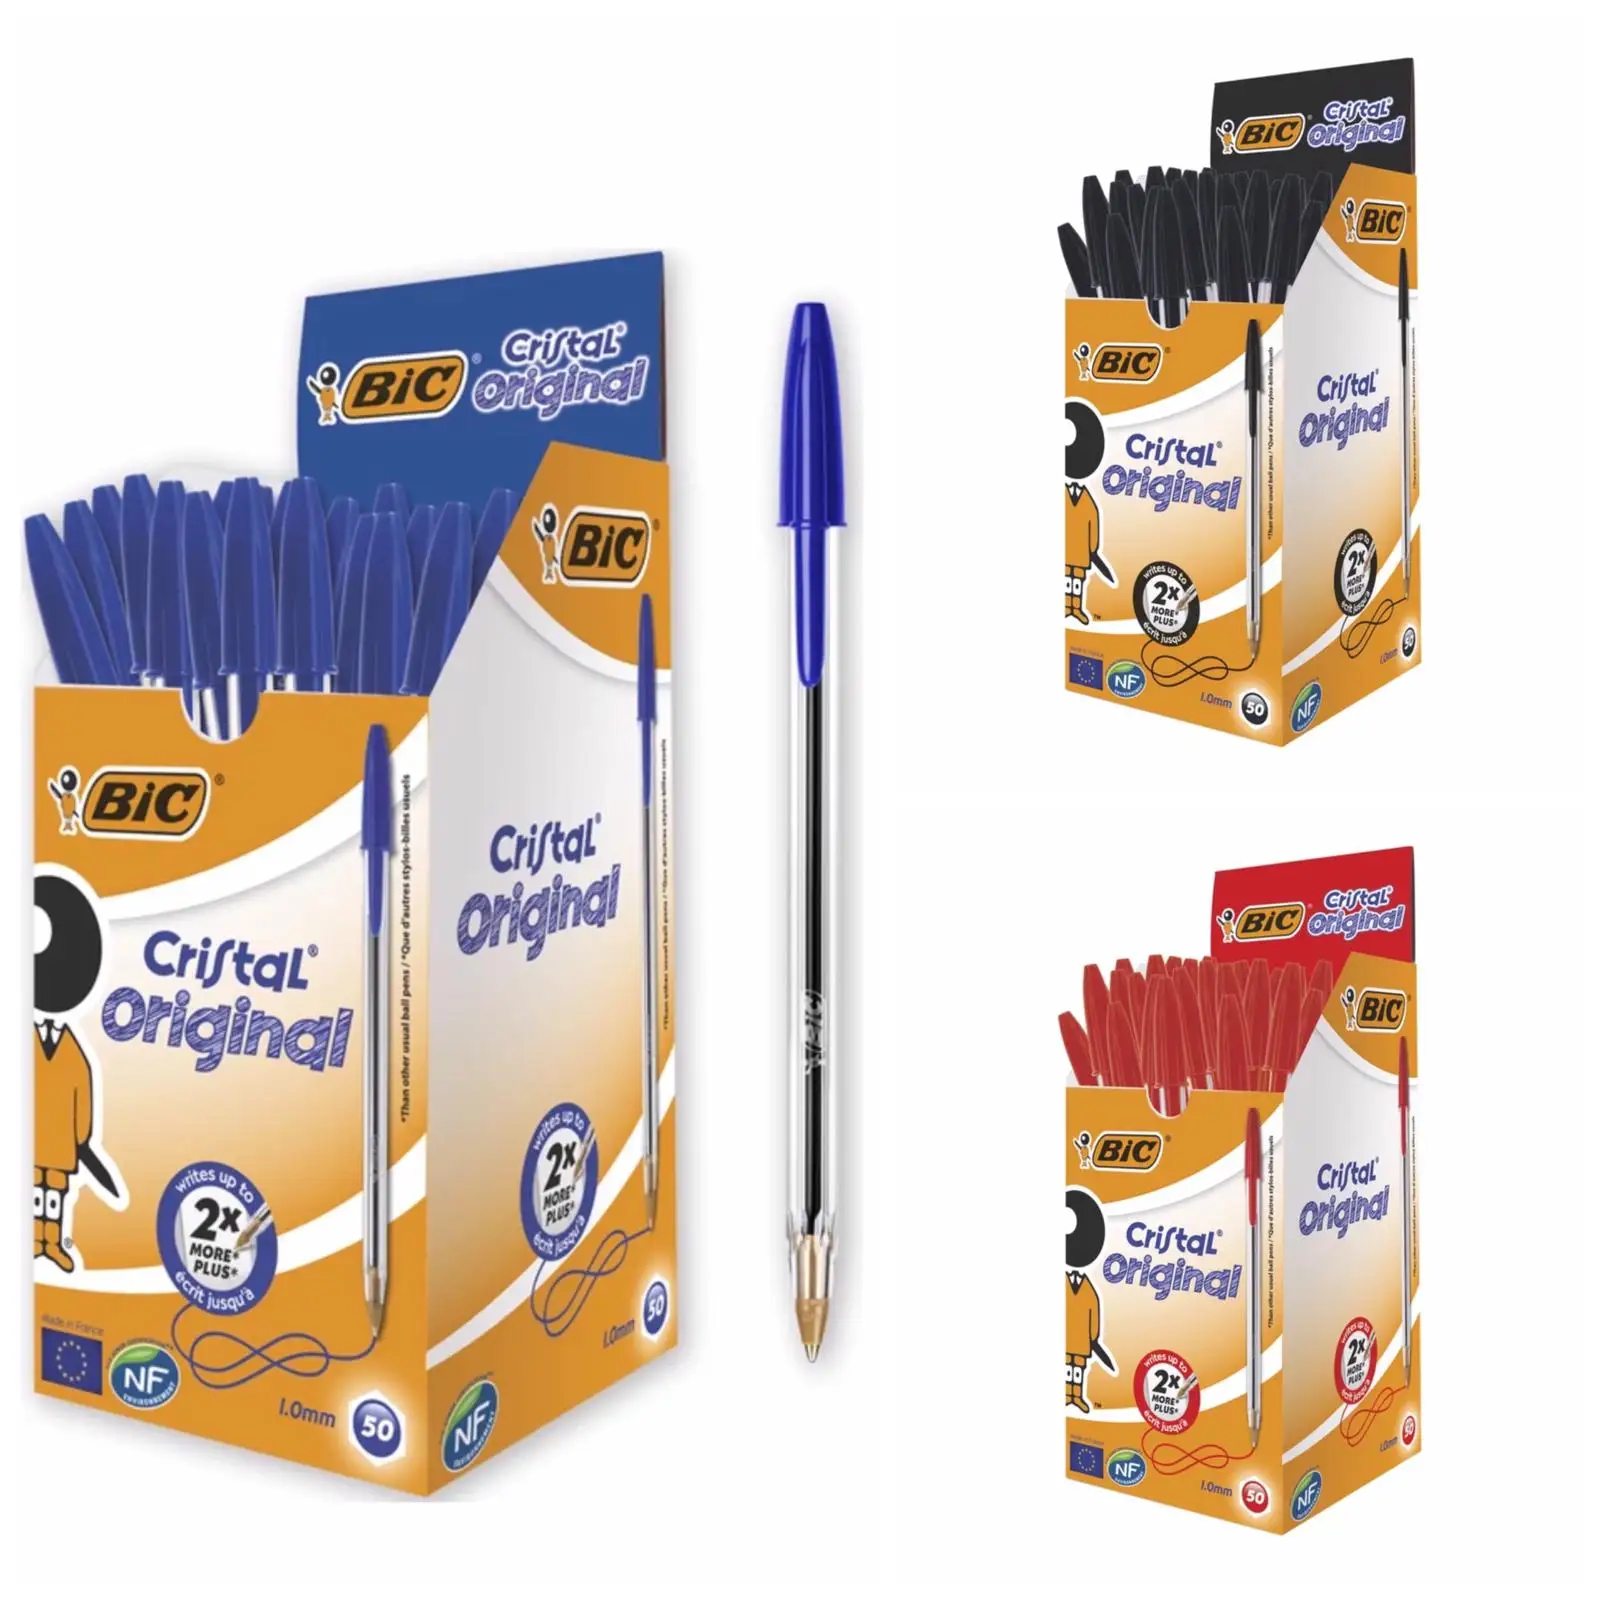 

Bic Cristal Medium Ballpoint Pen Blue Black Red 50 PCS in 1 Box Quality Durable Stationery School Office Supplies